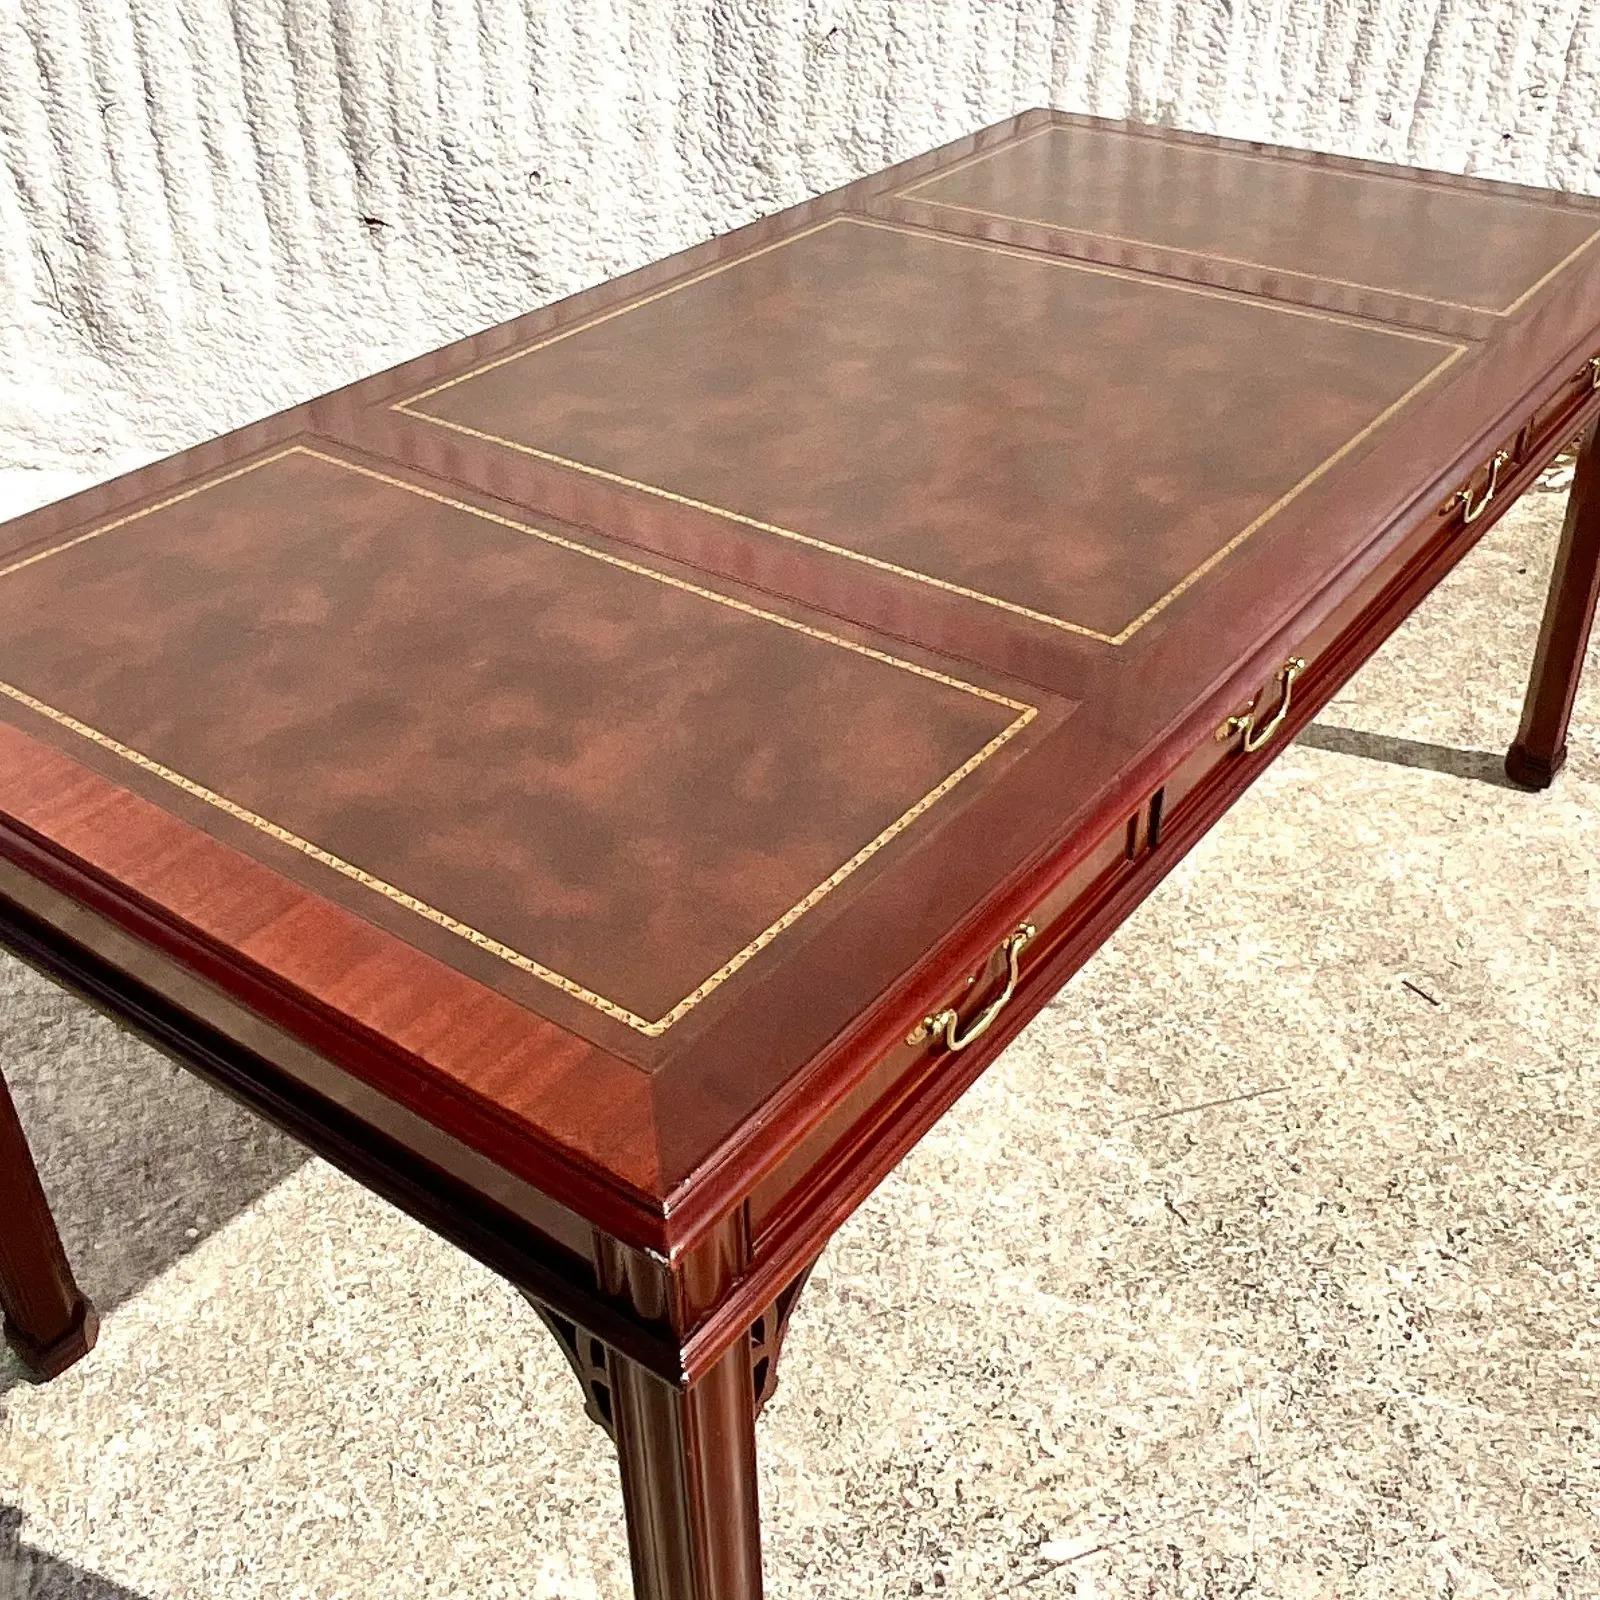 A fabulous vintage Regency Fretwork writing desk. Made by the iconic Councill Furniture group and marked on the drawer inside. Beautiful inset leather top with gold leaf detail. Acquired from a Palm Beach estate.